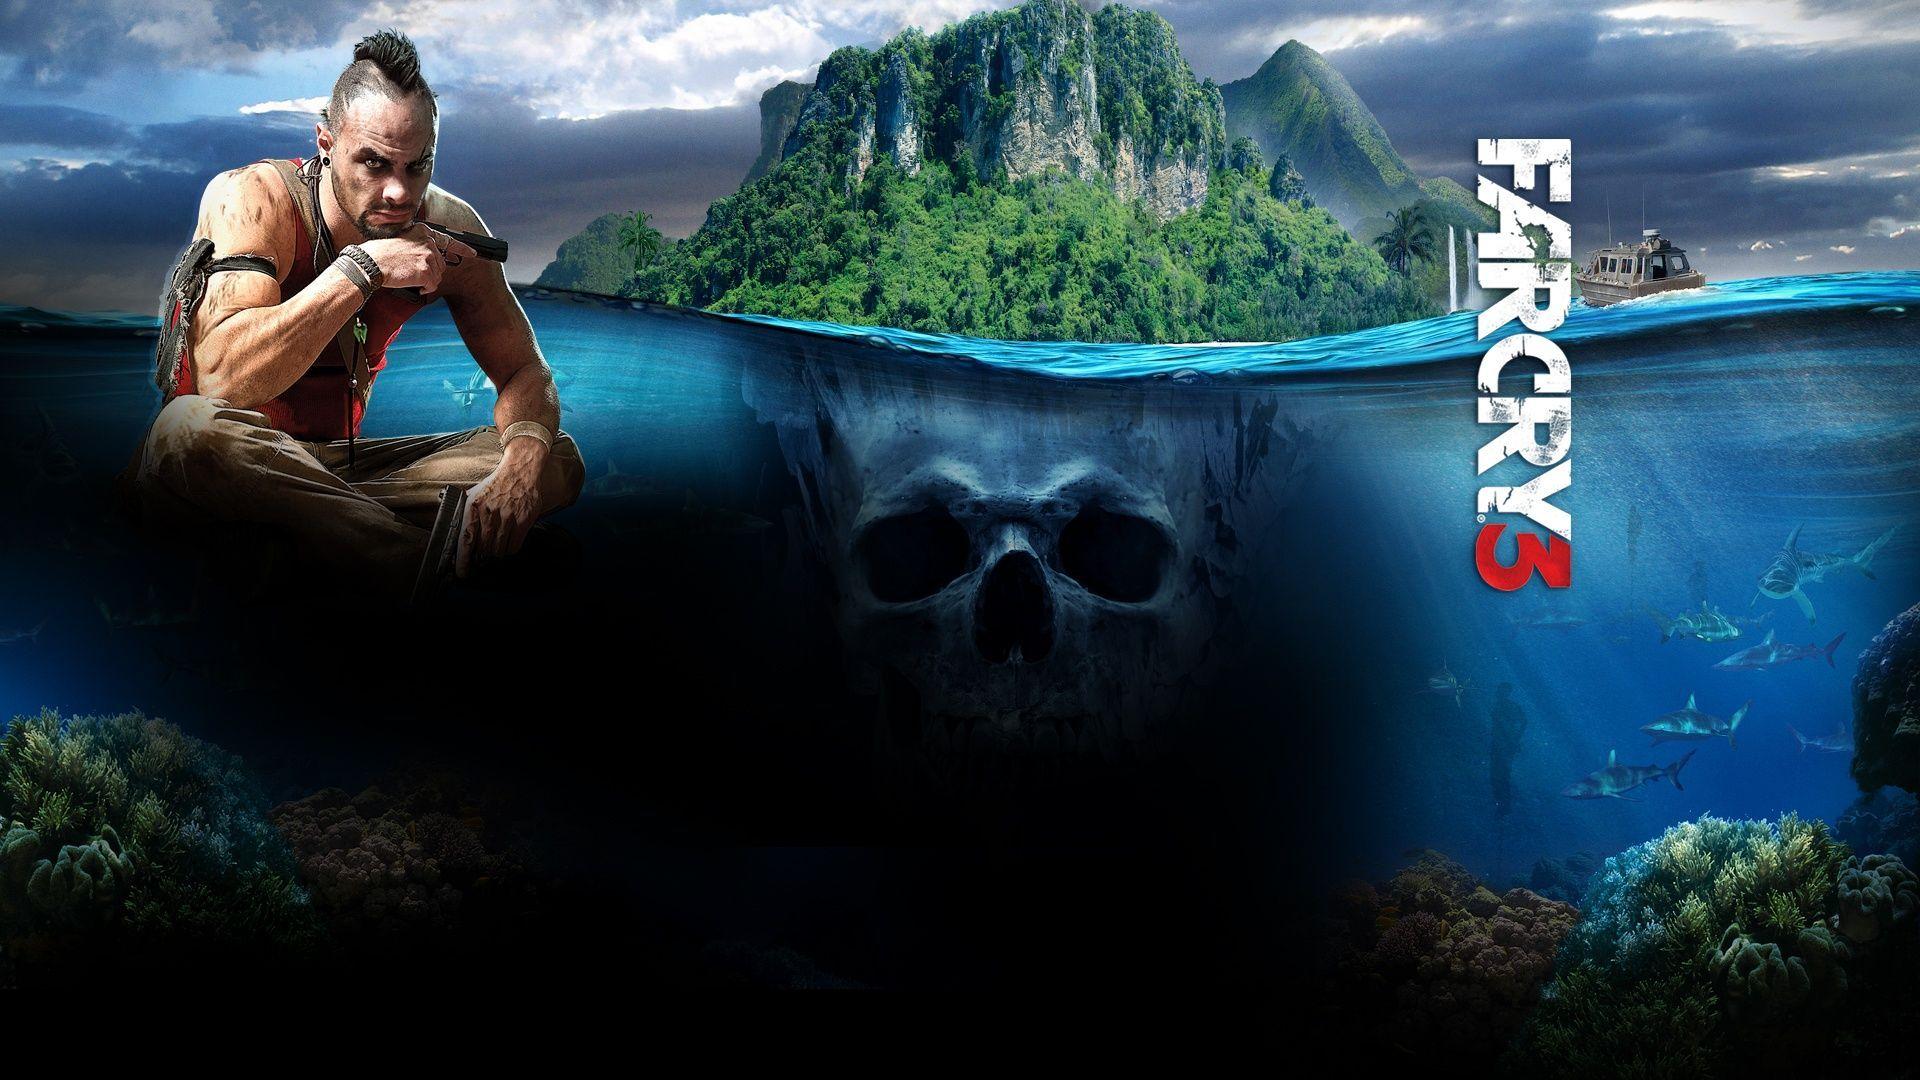 Far Cry 3 Game HD 1080p Wallpaper Download. Art That I Love